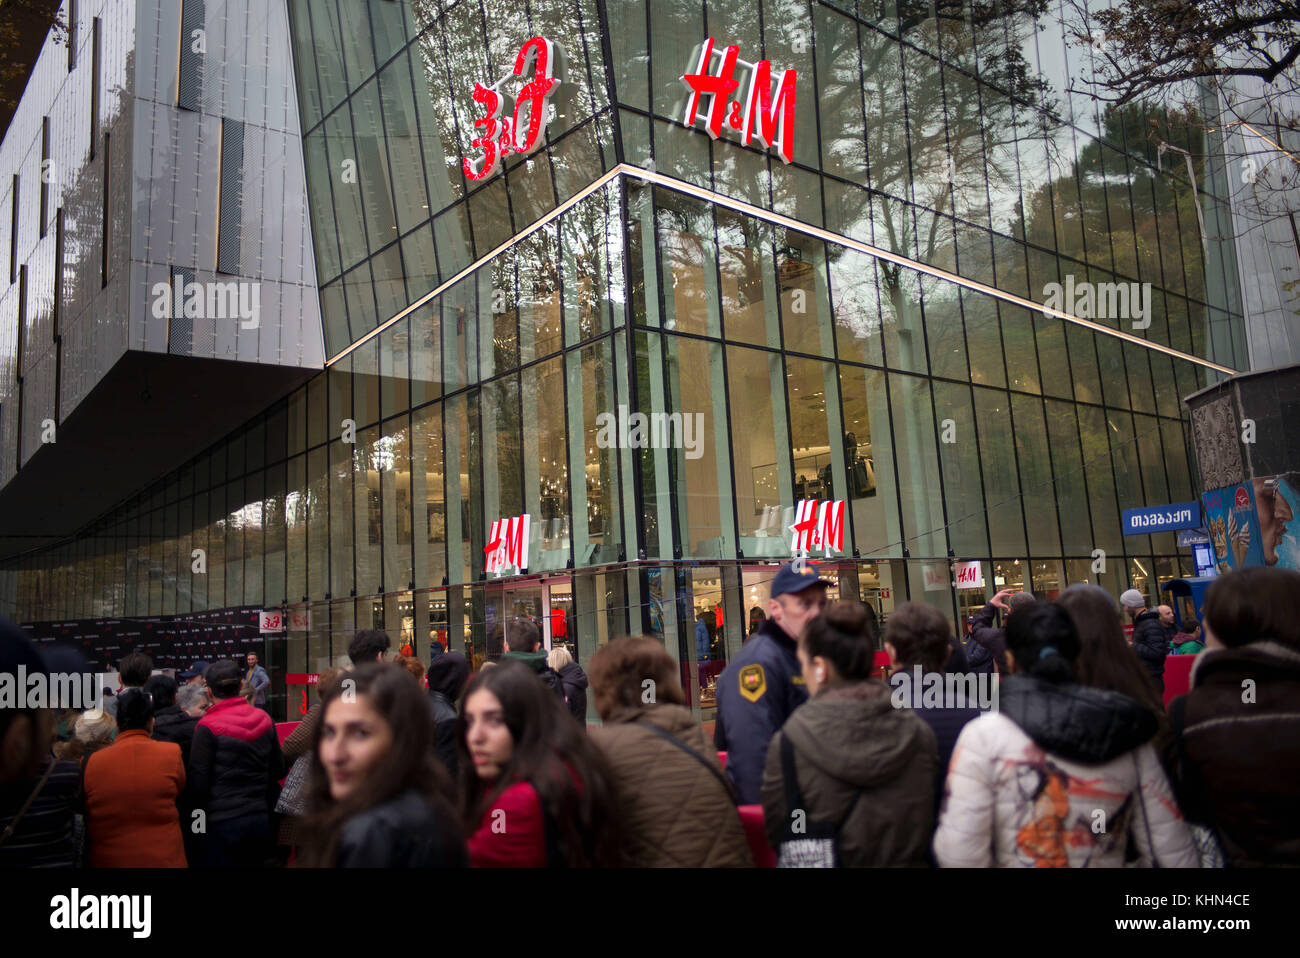 November 18, 2017 - Customers queue up to enter the newly opened H&M shop  in centre of Tbilisi, Georgia. H&M opened its first store in Tbilisi  Georgia Credit: Agron Dragaj/ZUMA Wire/Alamy Live